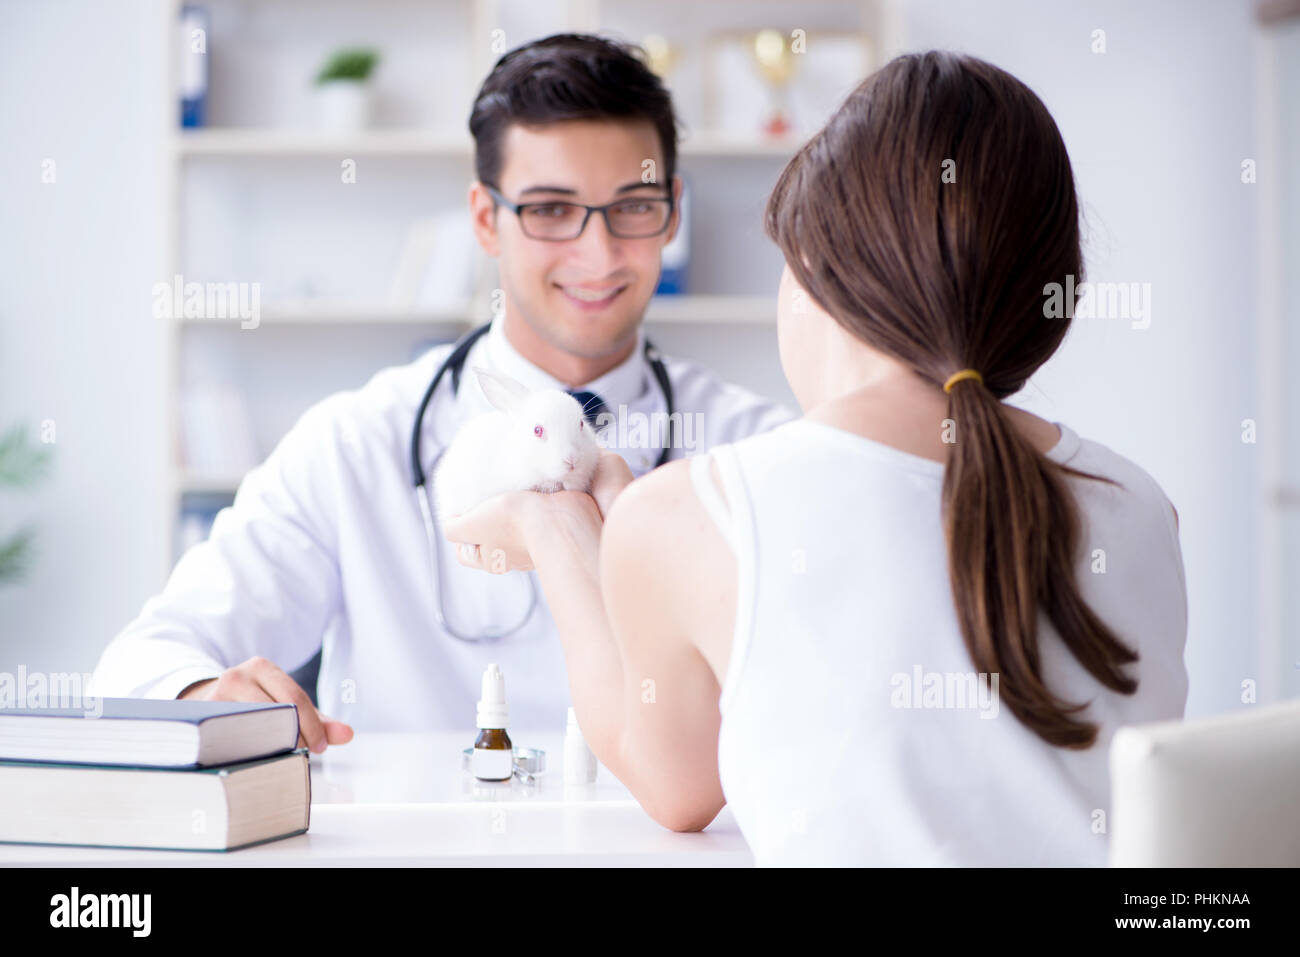 Woman with pet rabbit visiting vet doctor Stock Photo